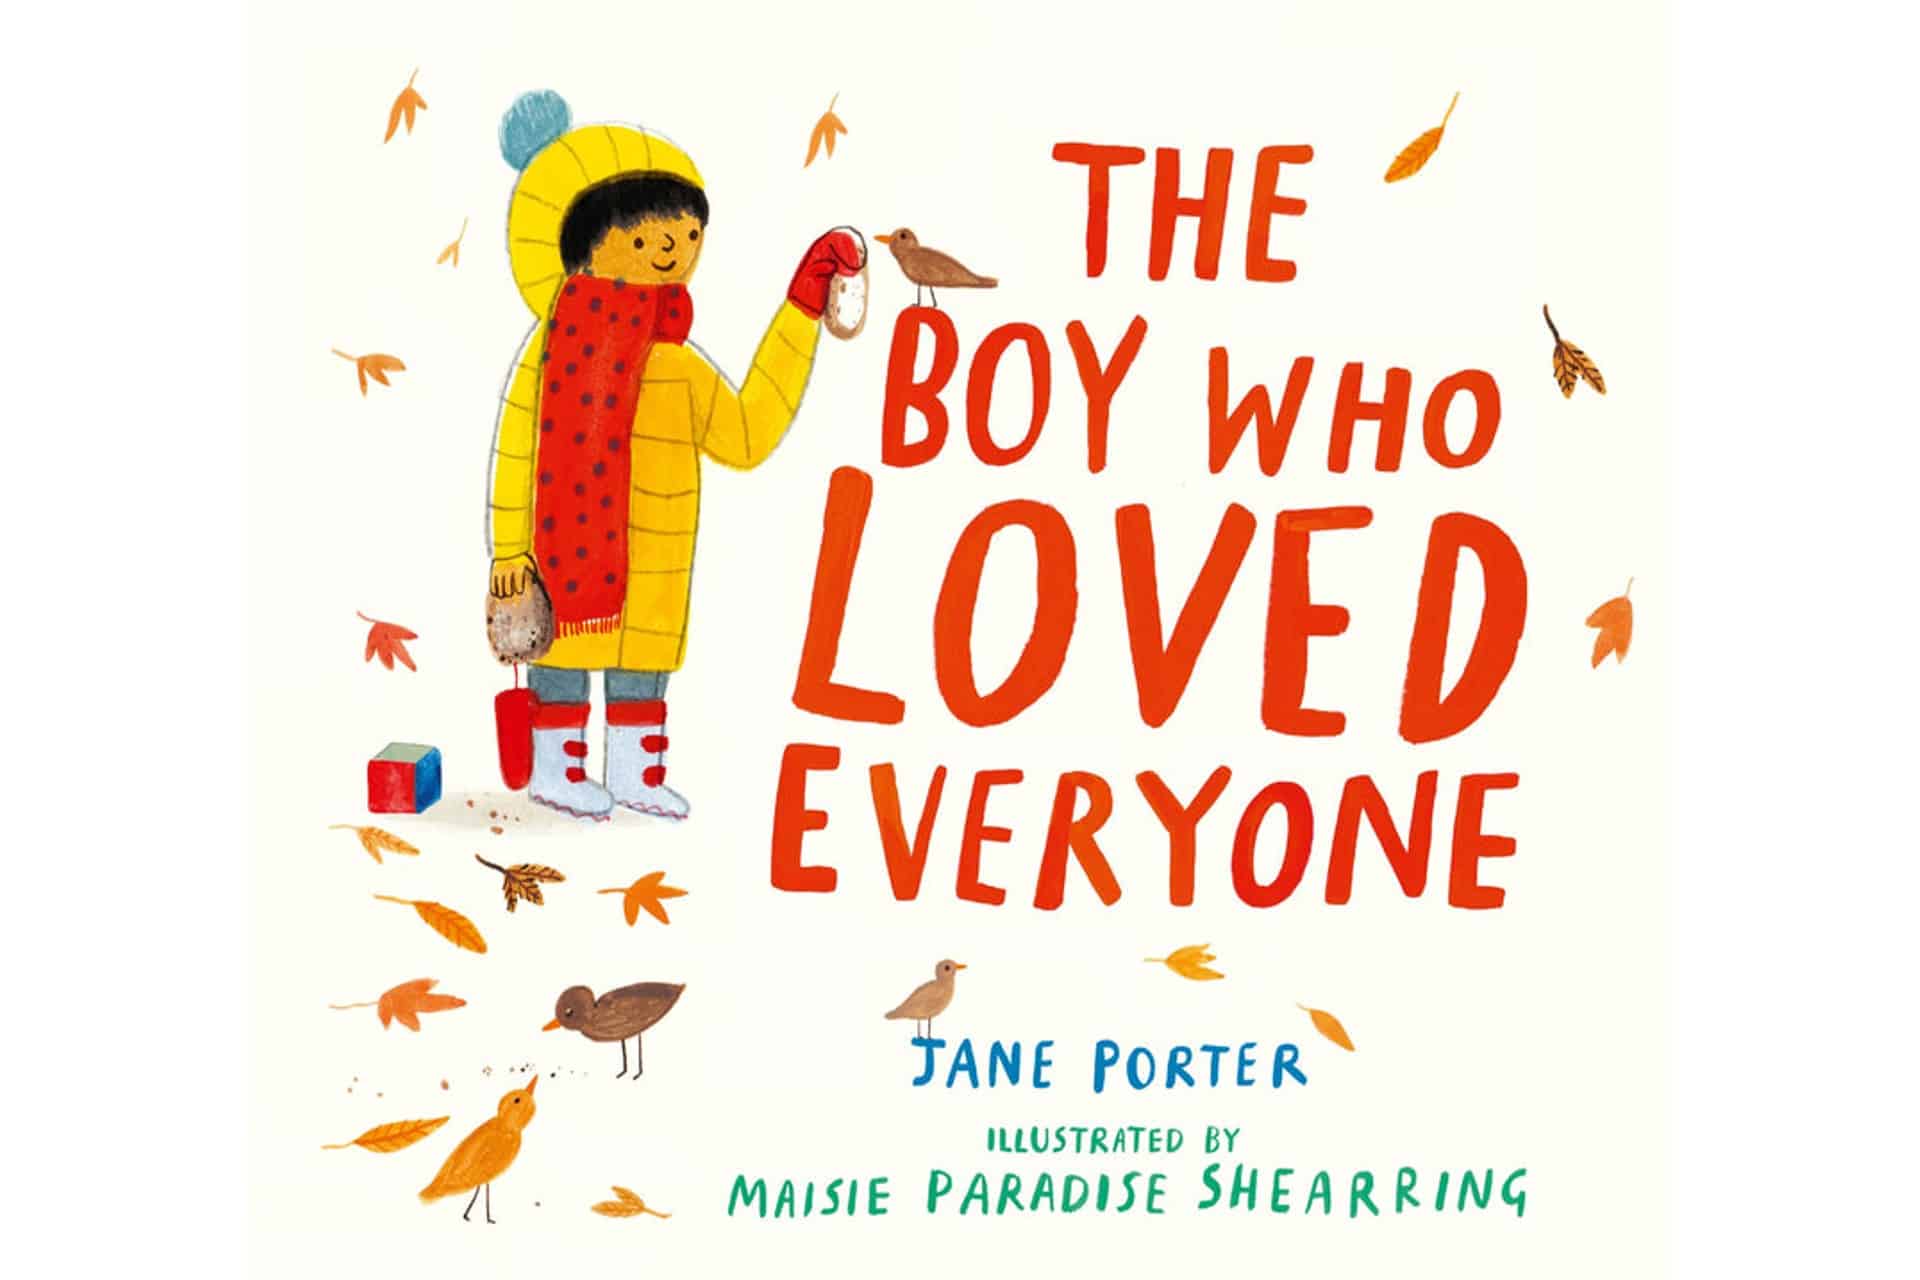 book cover that says "the boy who loved everyone" with a little boy bundled up in winter gear making friends with a bird